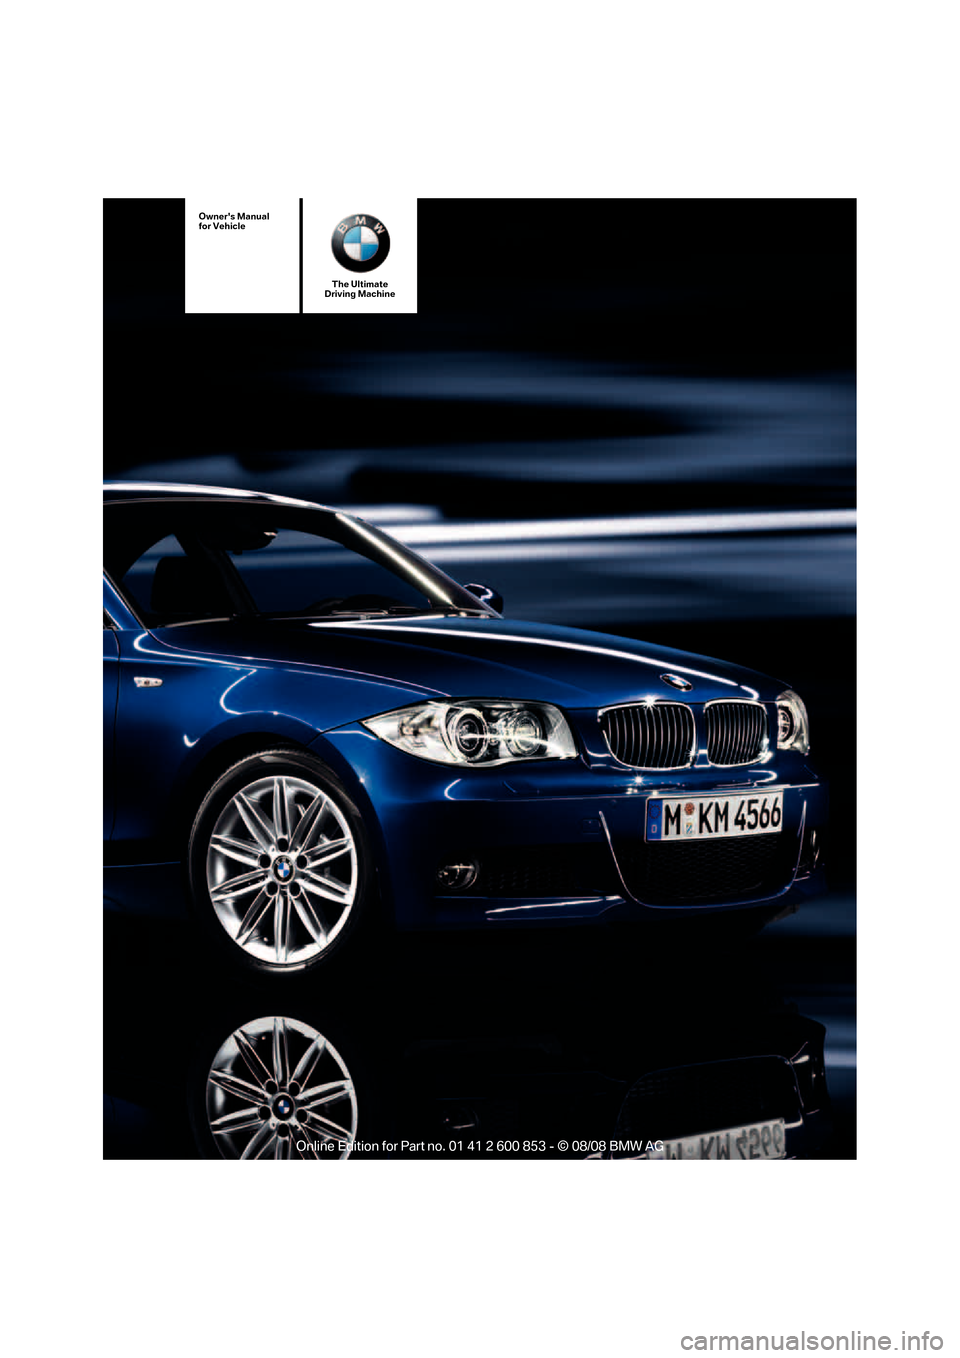 BMW 135I 2009 E81 Owners Manual The Ultimate
Driving Machine
Owners Manual
for Vehicle 